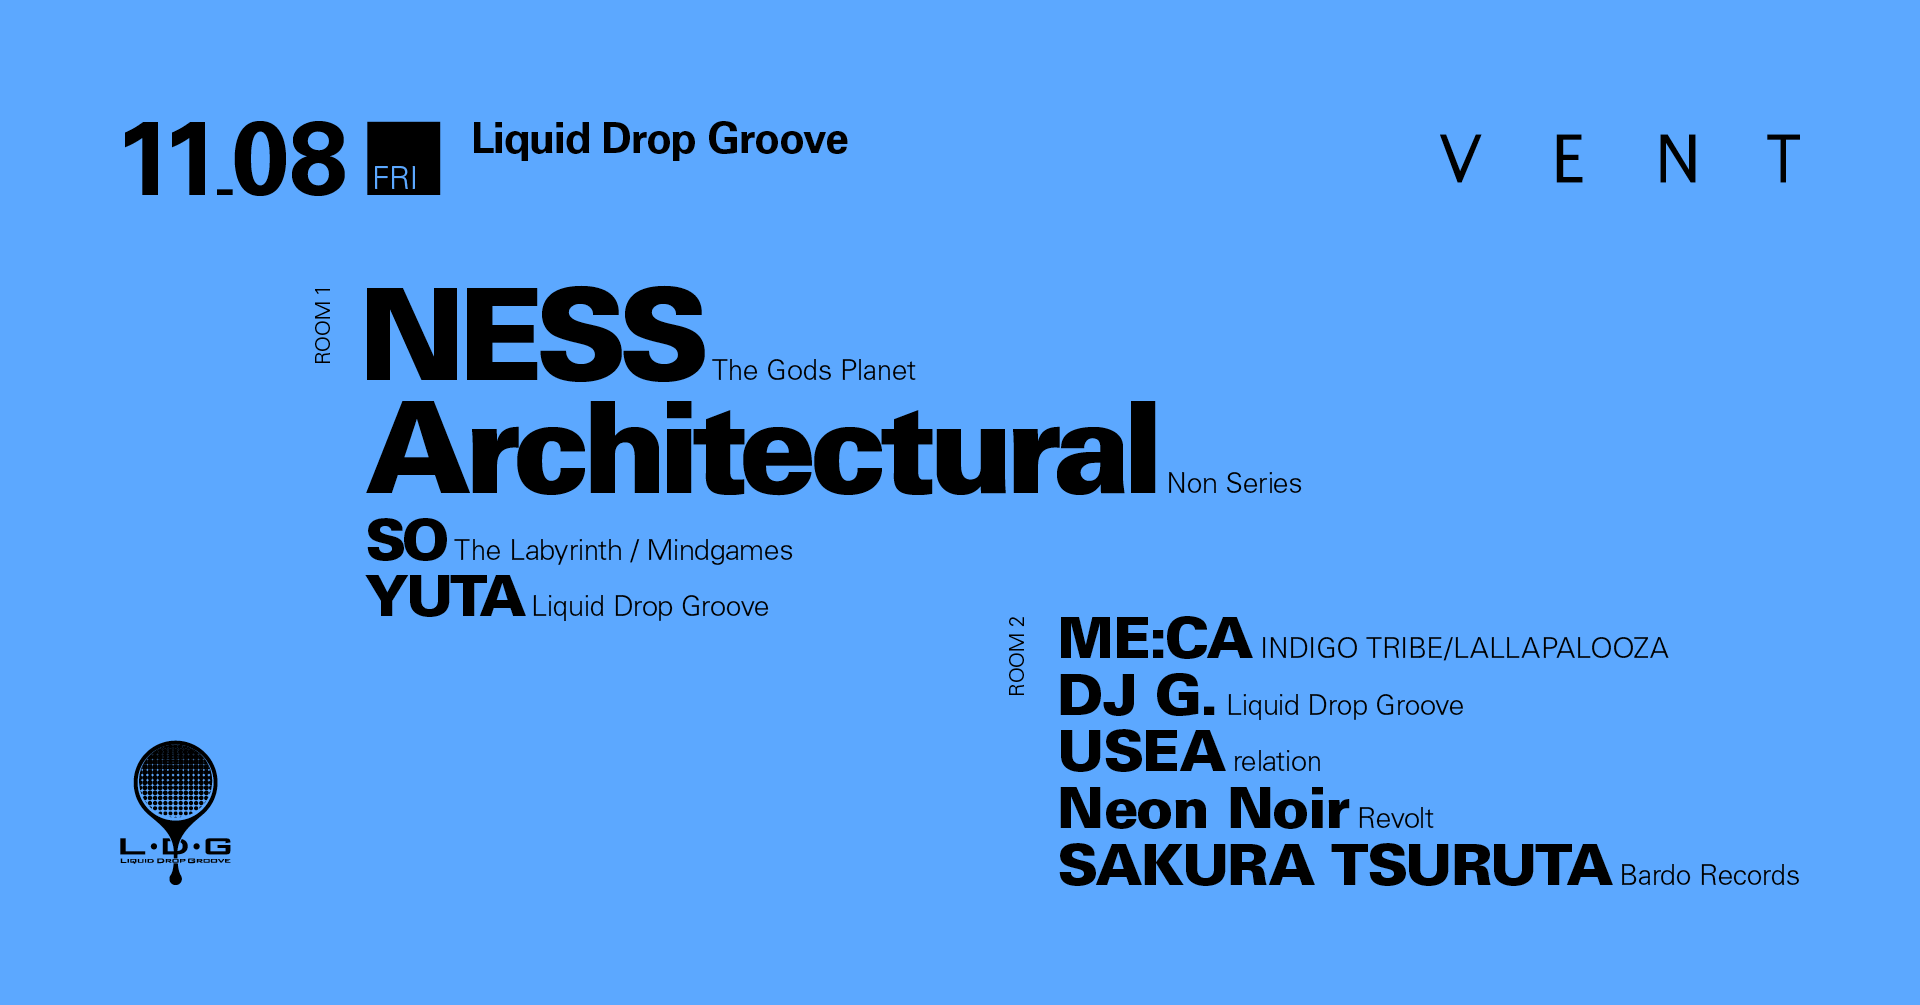 NESS & Architectural at Liquid Drop Groove